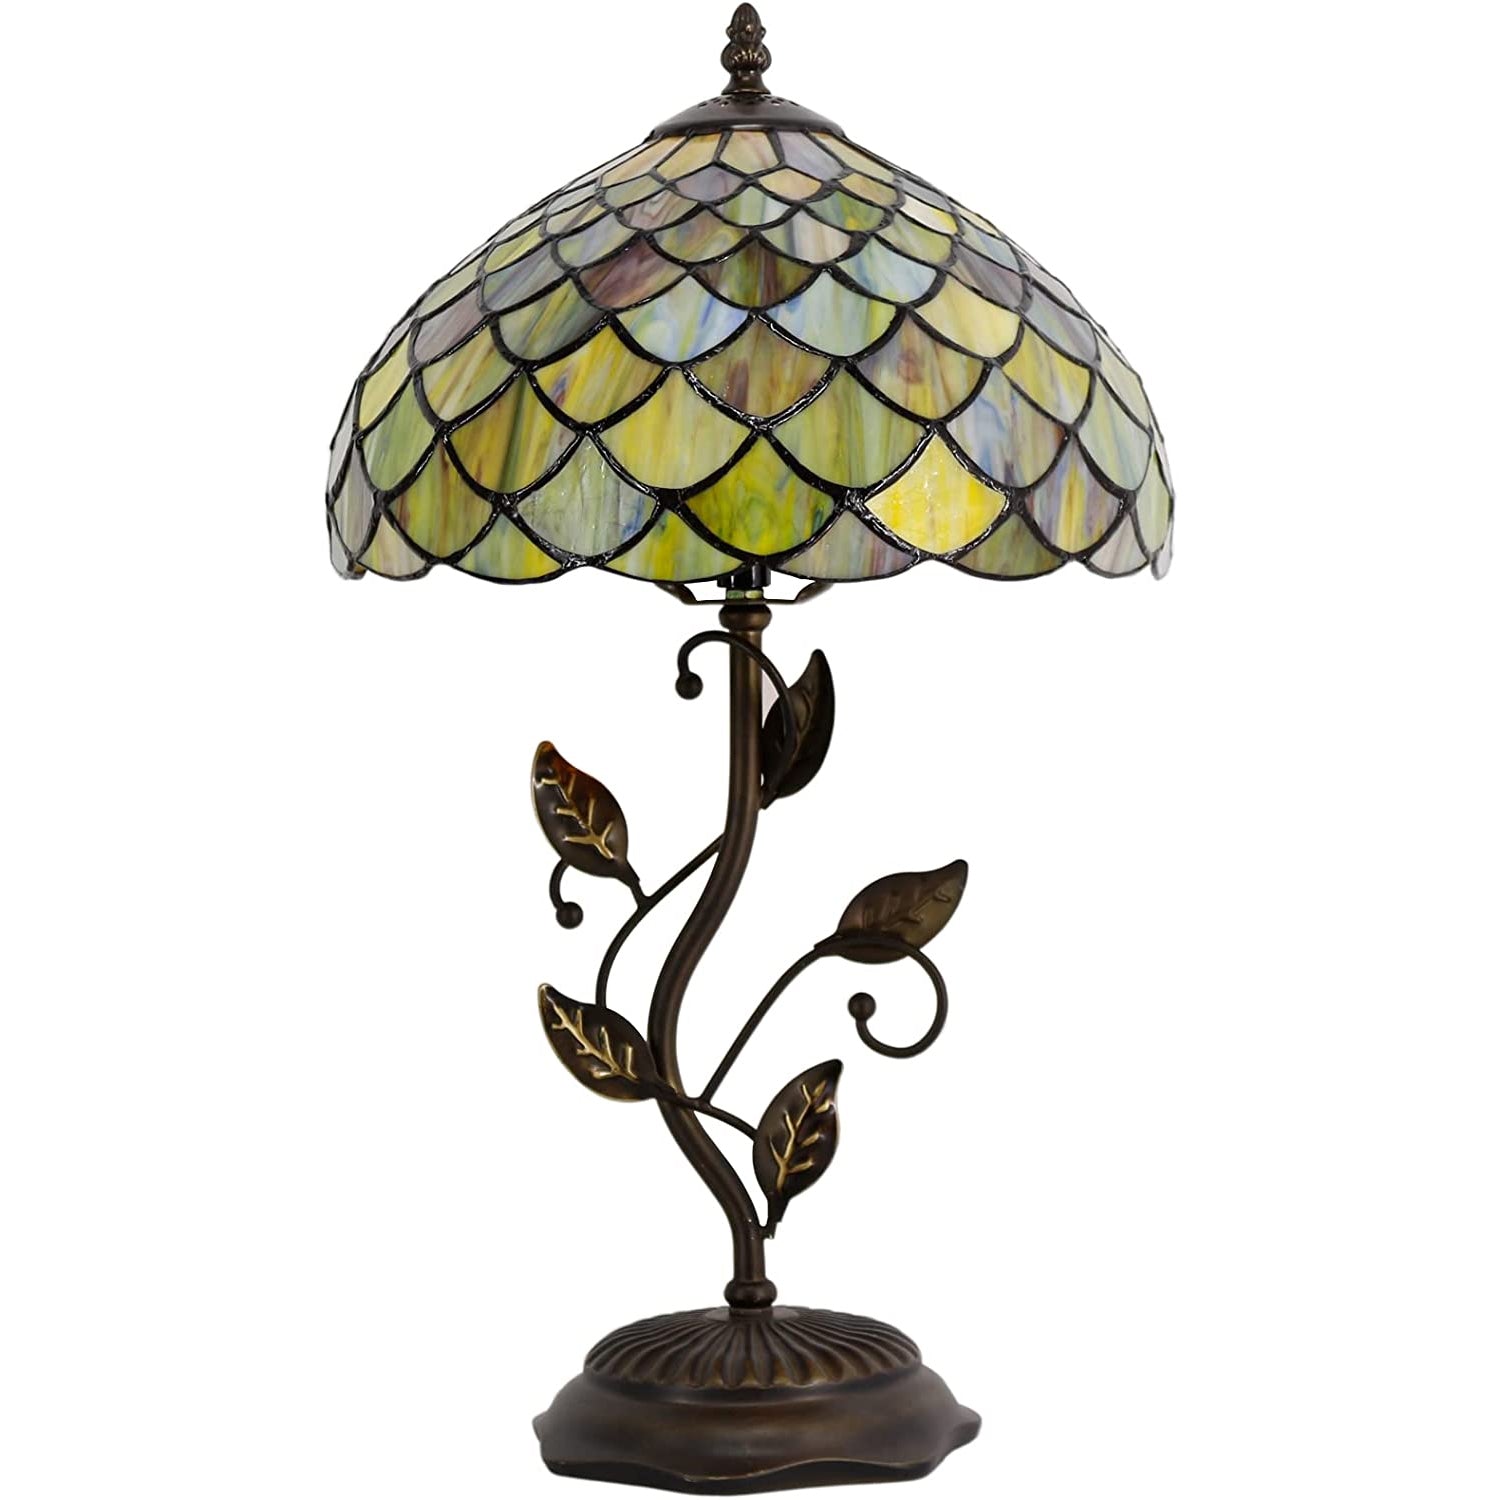 Werfactory® Tiffany Table Lamp, Stained Glass Lamp, Fish Scales Desk Light W12H19 Inch